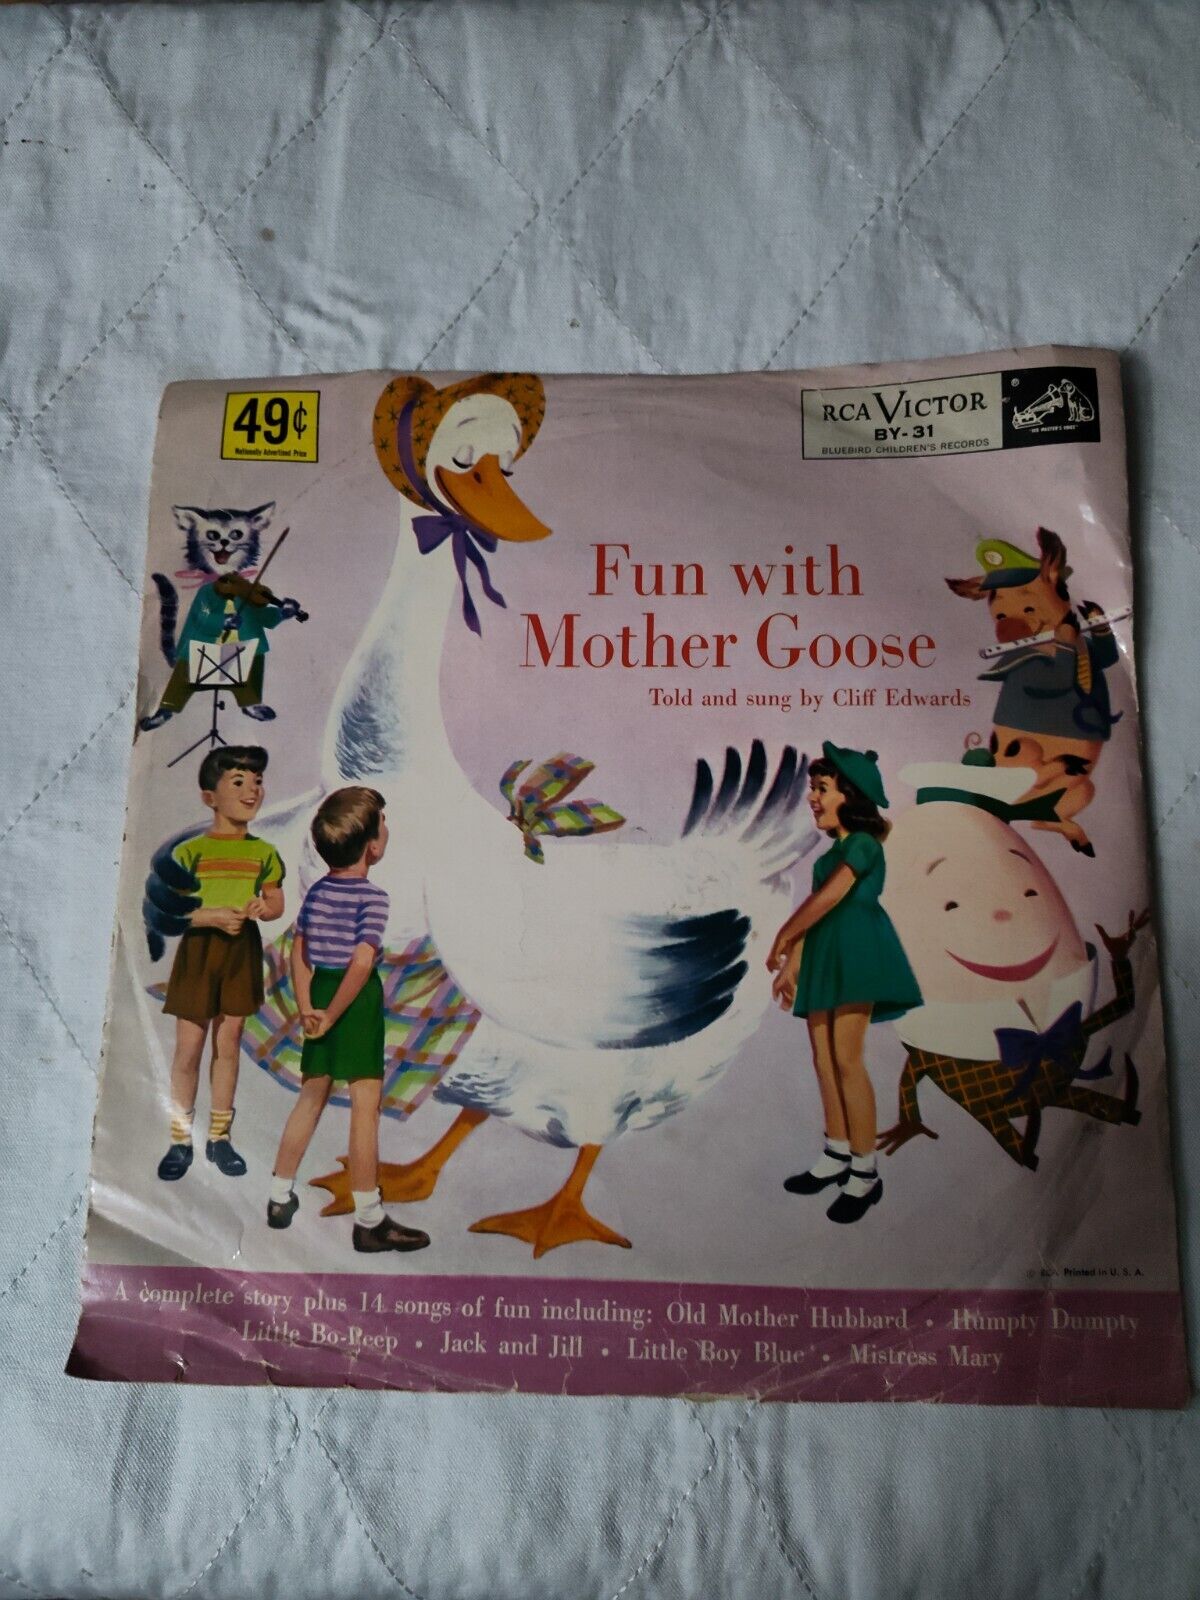 VINTAGE 1950'S/MOTHER GOOSE 10 inch RECORD by RCA/ VICTOR